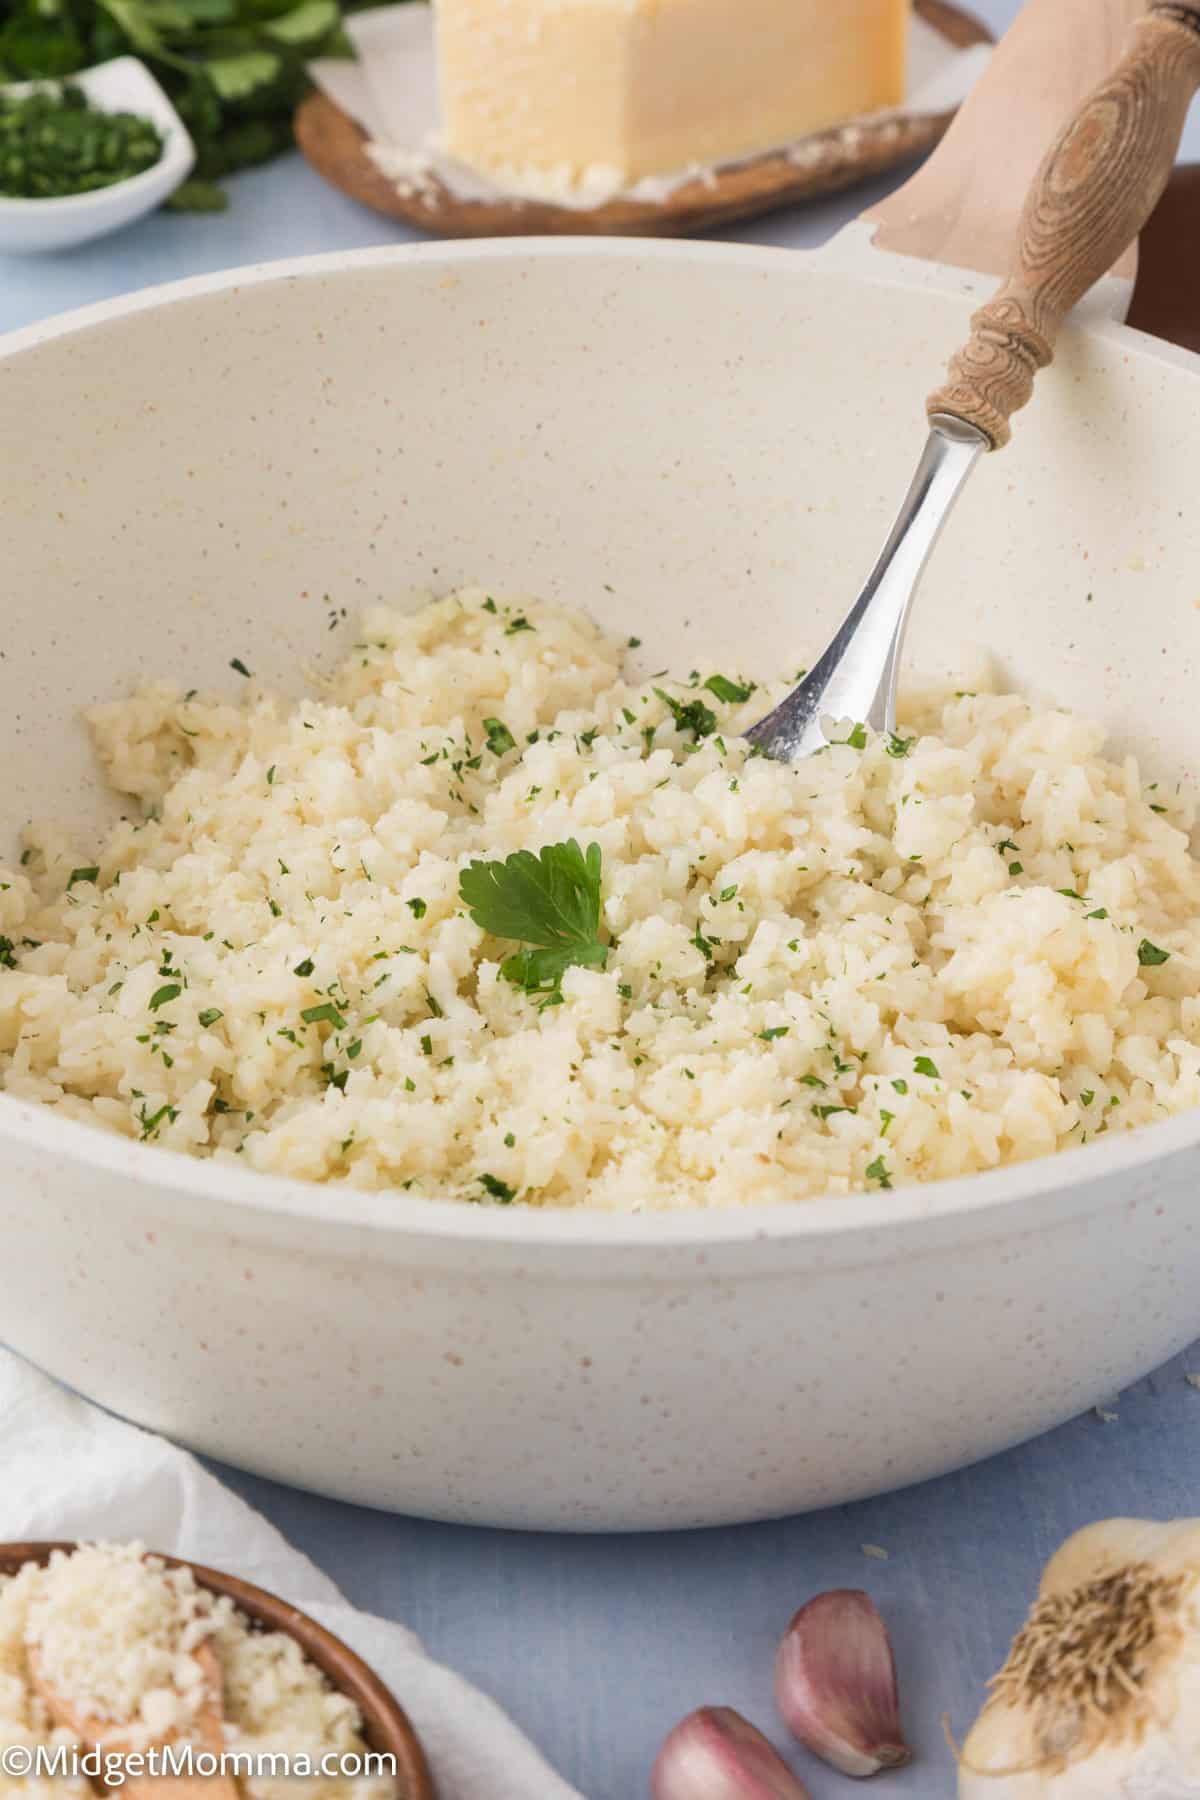 A bowl of creamy parmesan rice garnished with chopped parsley, with a fork in it, surrounded by ingredients like garlic and cheese on a blue tablecloth.